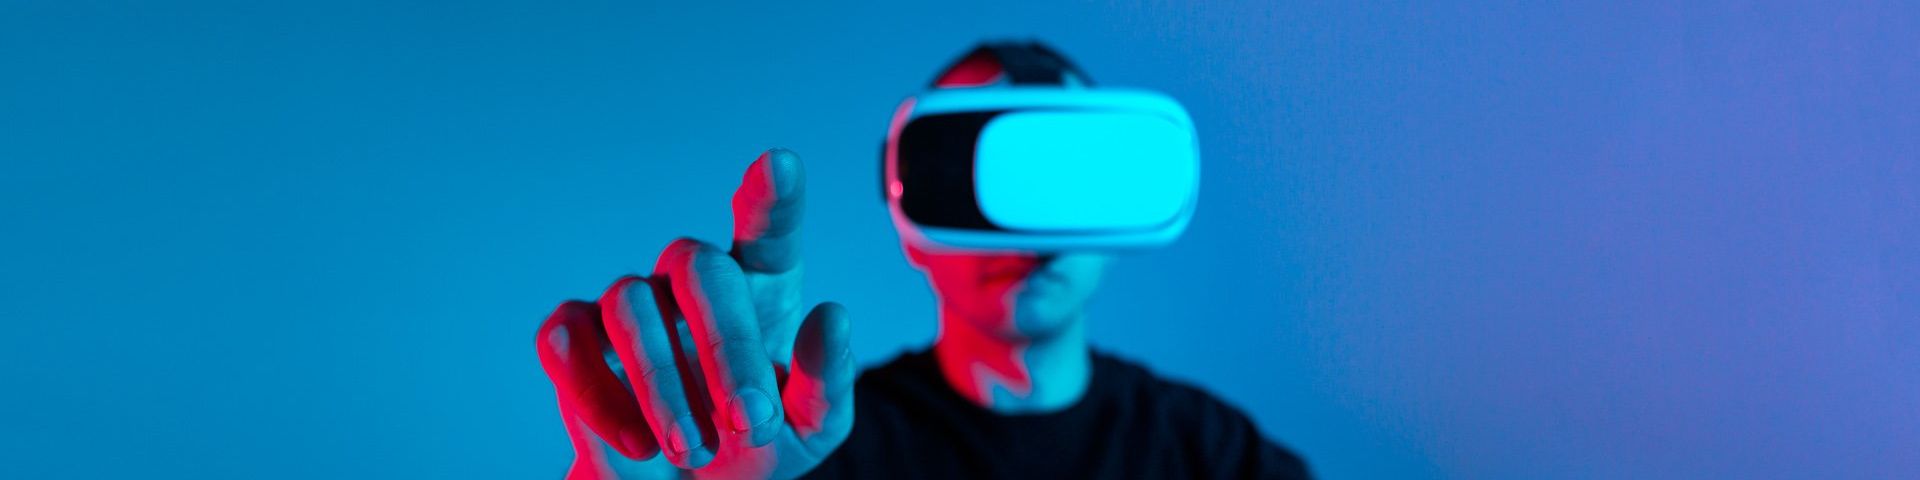 A man in a VR headset stands against a blue background with his finger pointed to the camera.